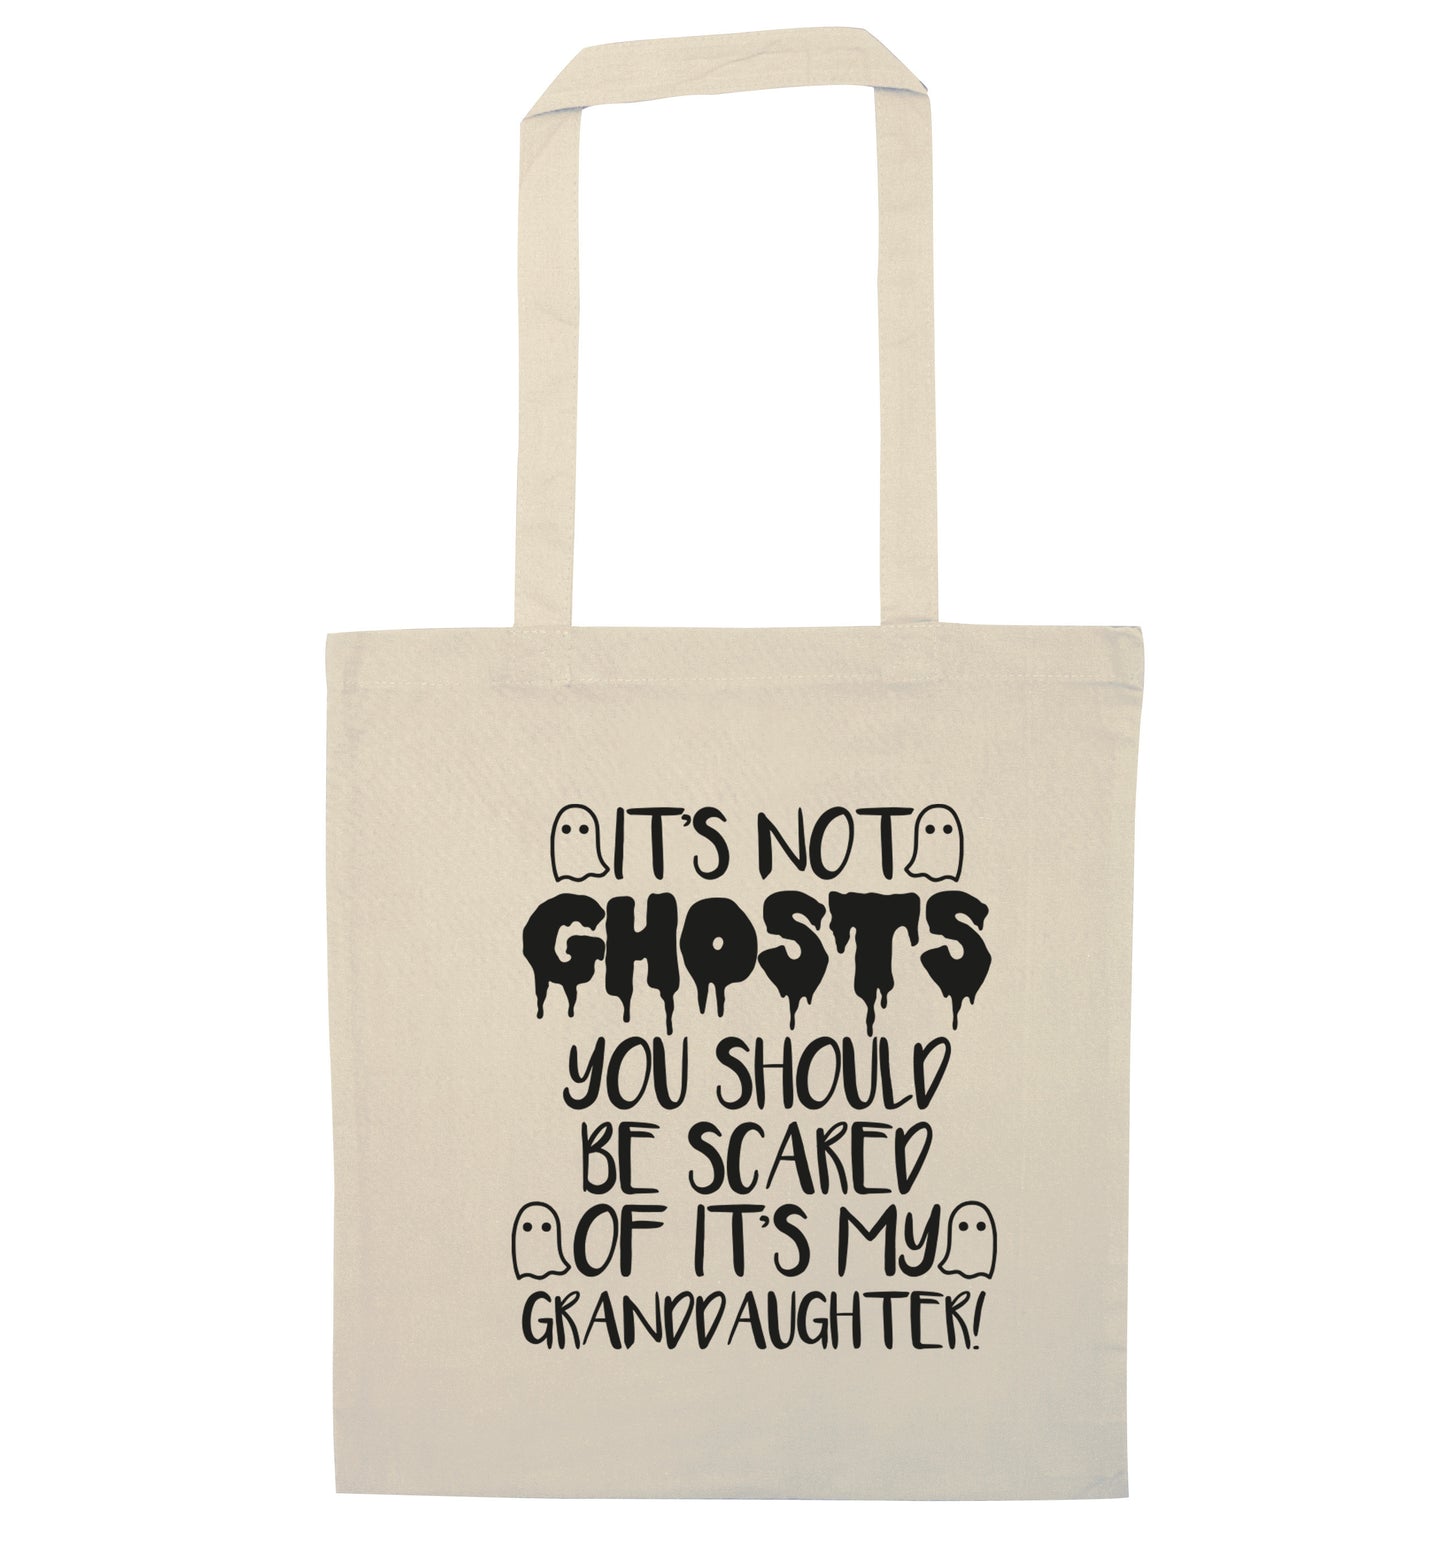 It's not ghosts you should be scared of it's my granddaughter! natural tote bag